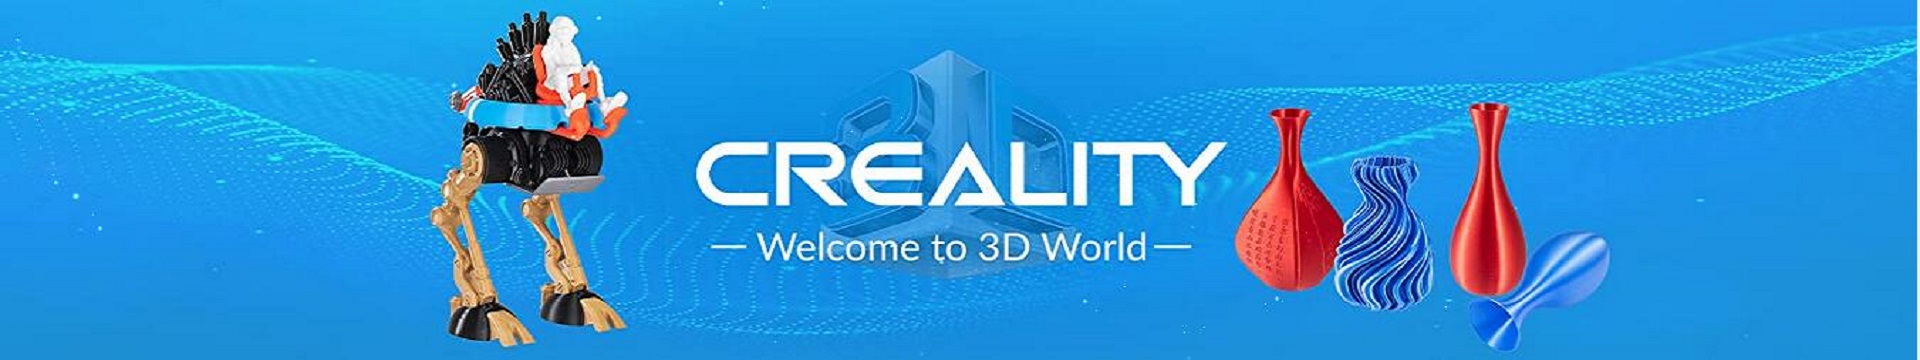 Welcome to 3D World